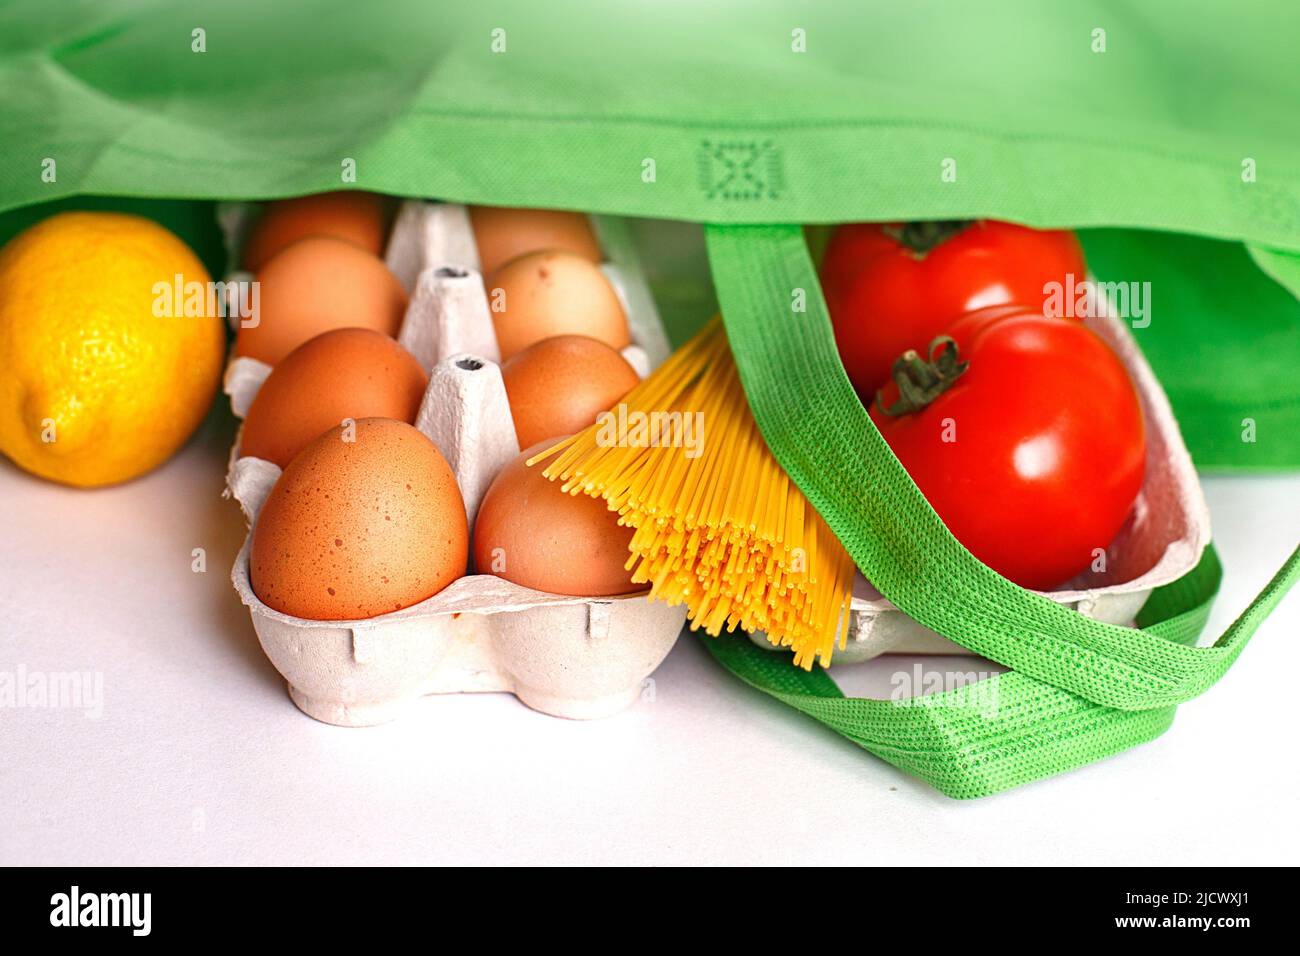 Full green bag of healthy food on a white background. Top view. fruit, vegetable, eggs online shop. your text. food delivery Stock Photo